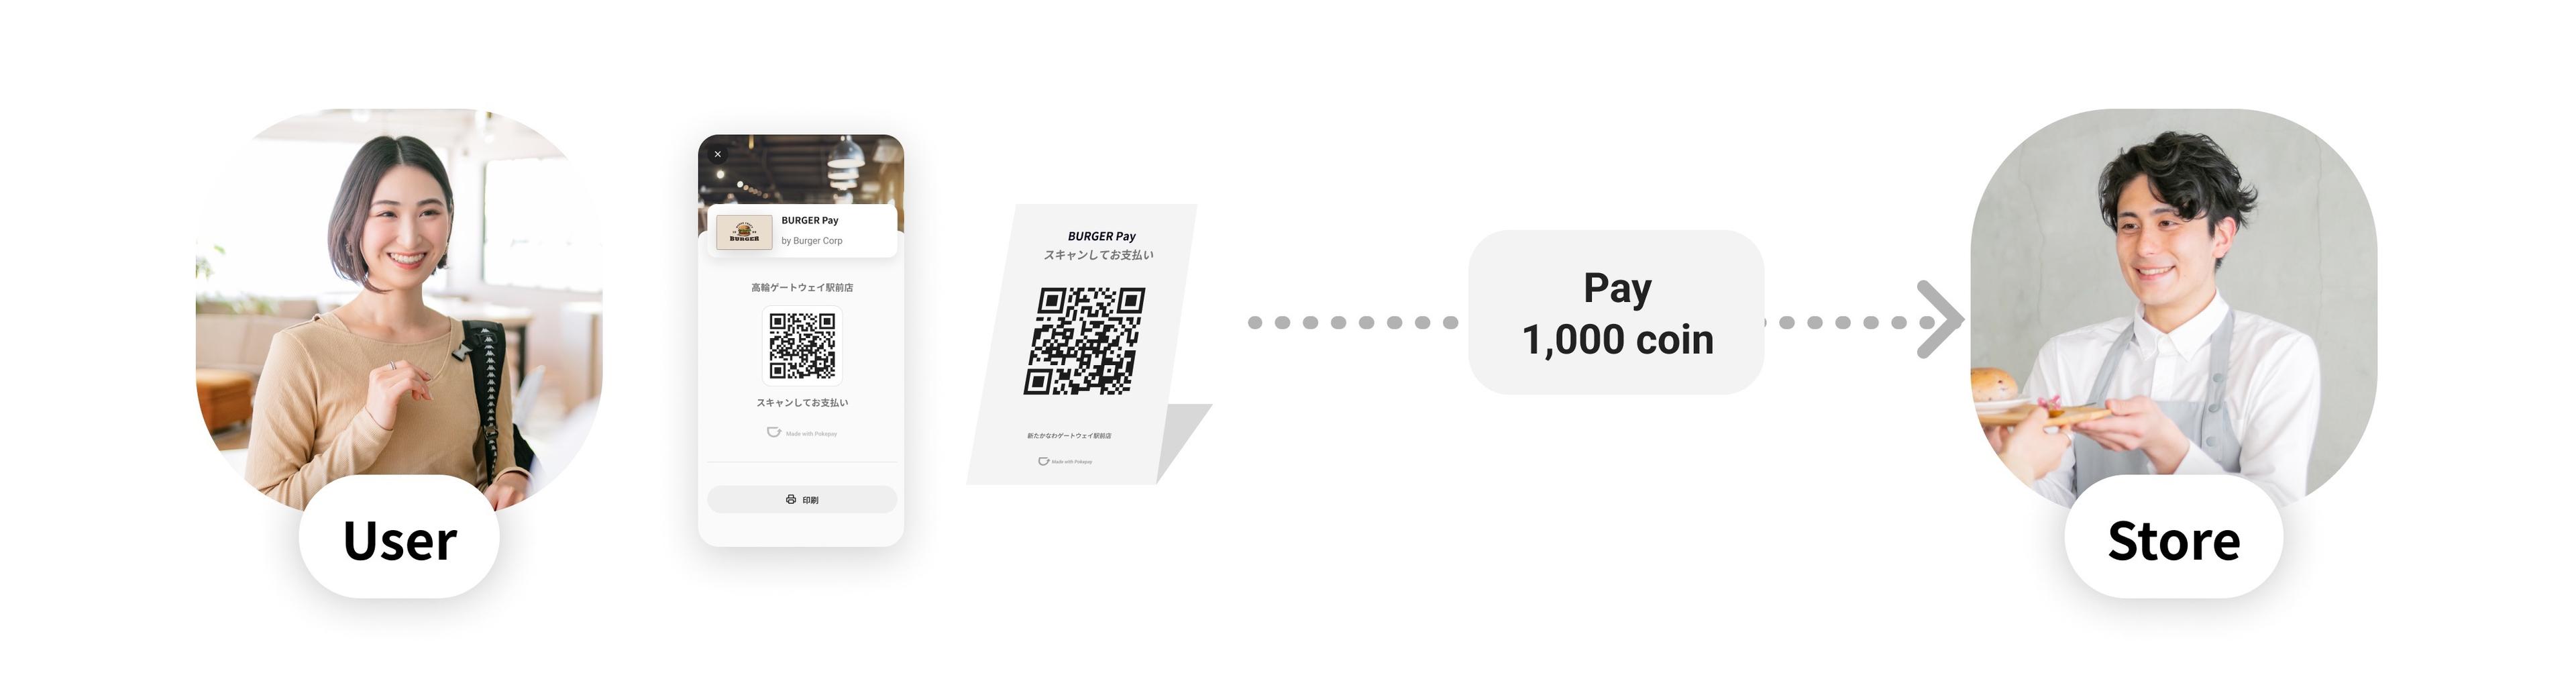 The desktop image of payment with QR code for English